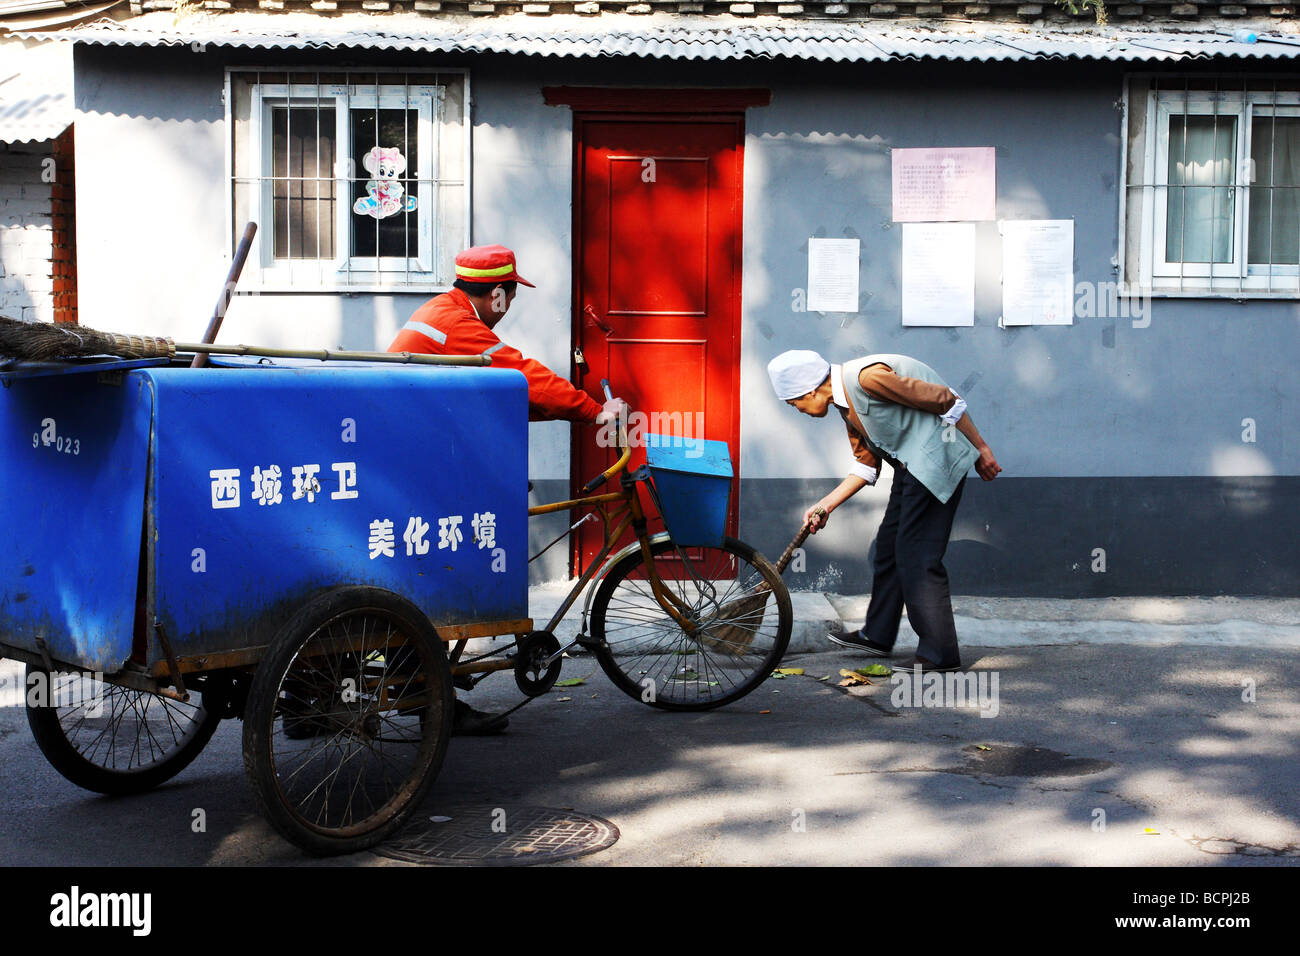 Janitors cleaning street in a Hutong, Beijing, China Stock Photo